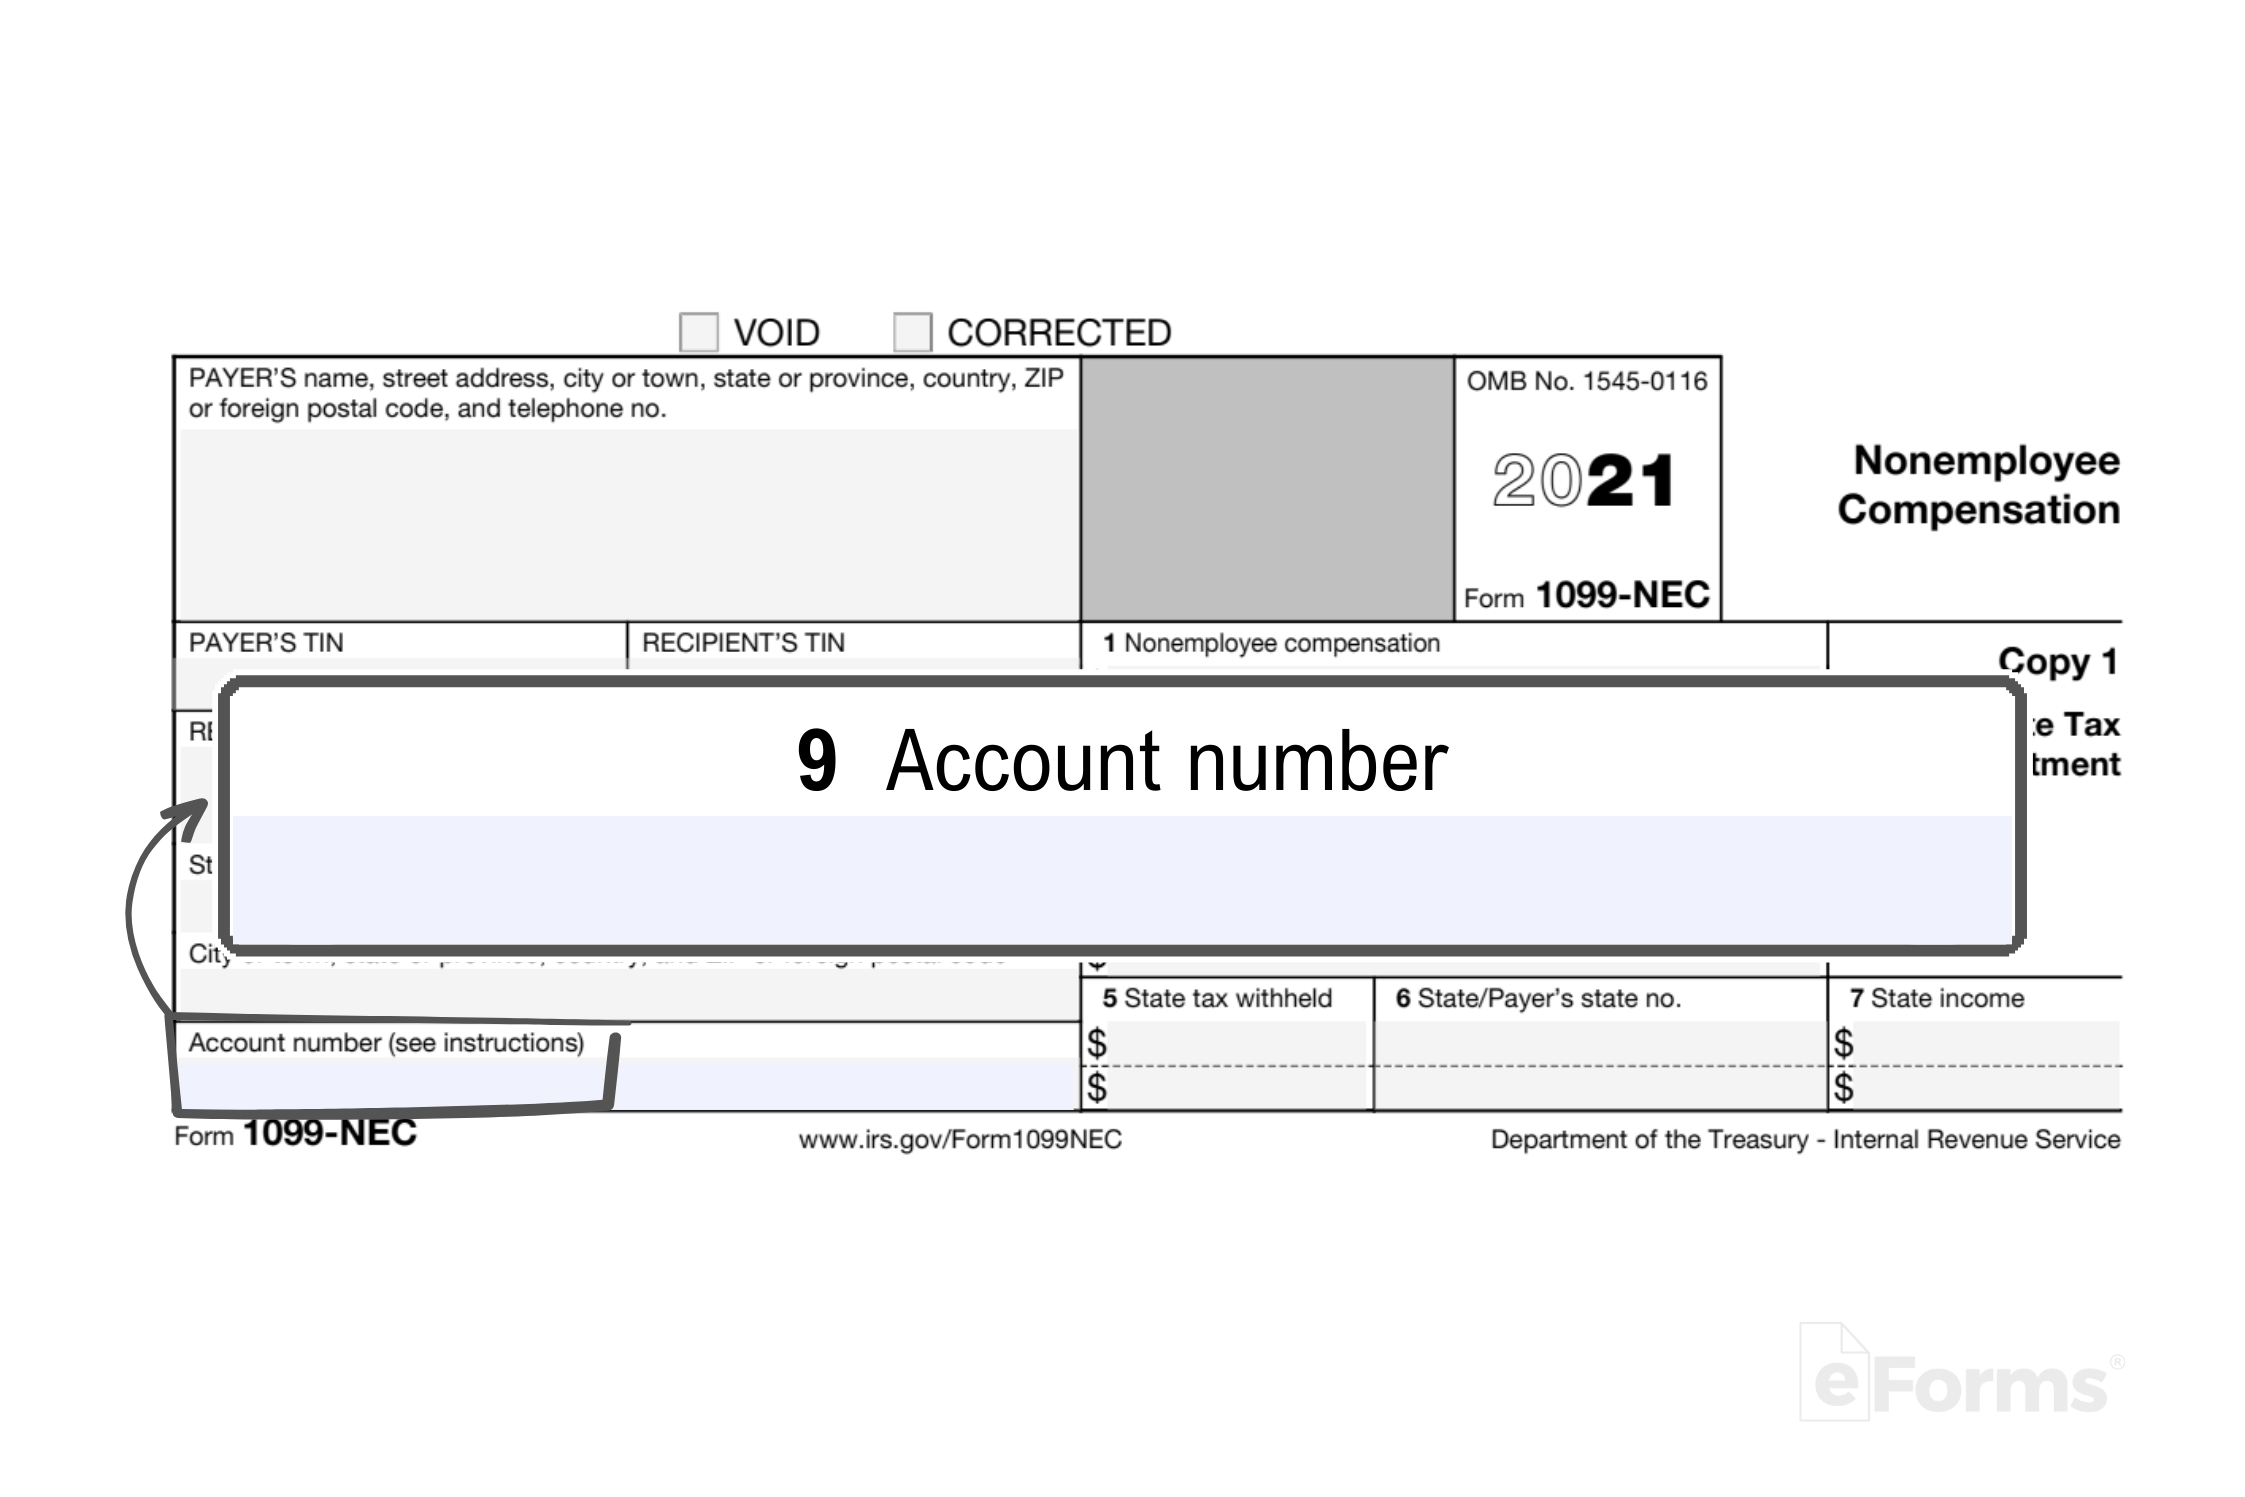 2023-FOUR FORM 1099-MISC and TWO FORM 1096-EIGHT RECIPIENTS (NO